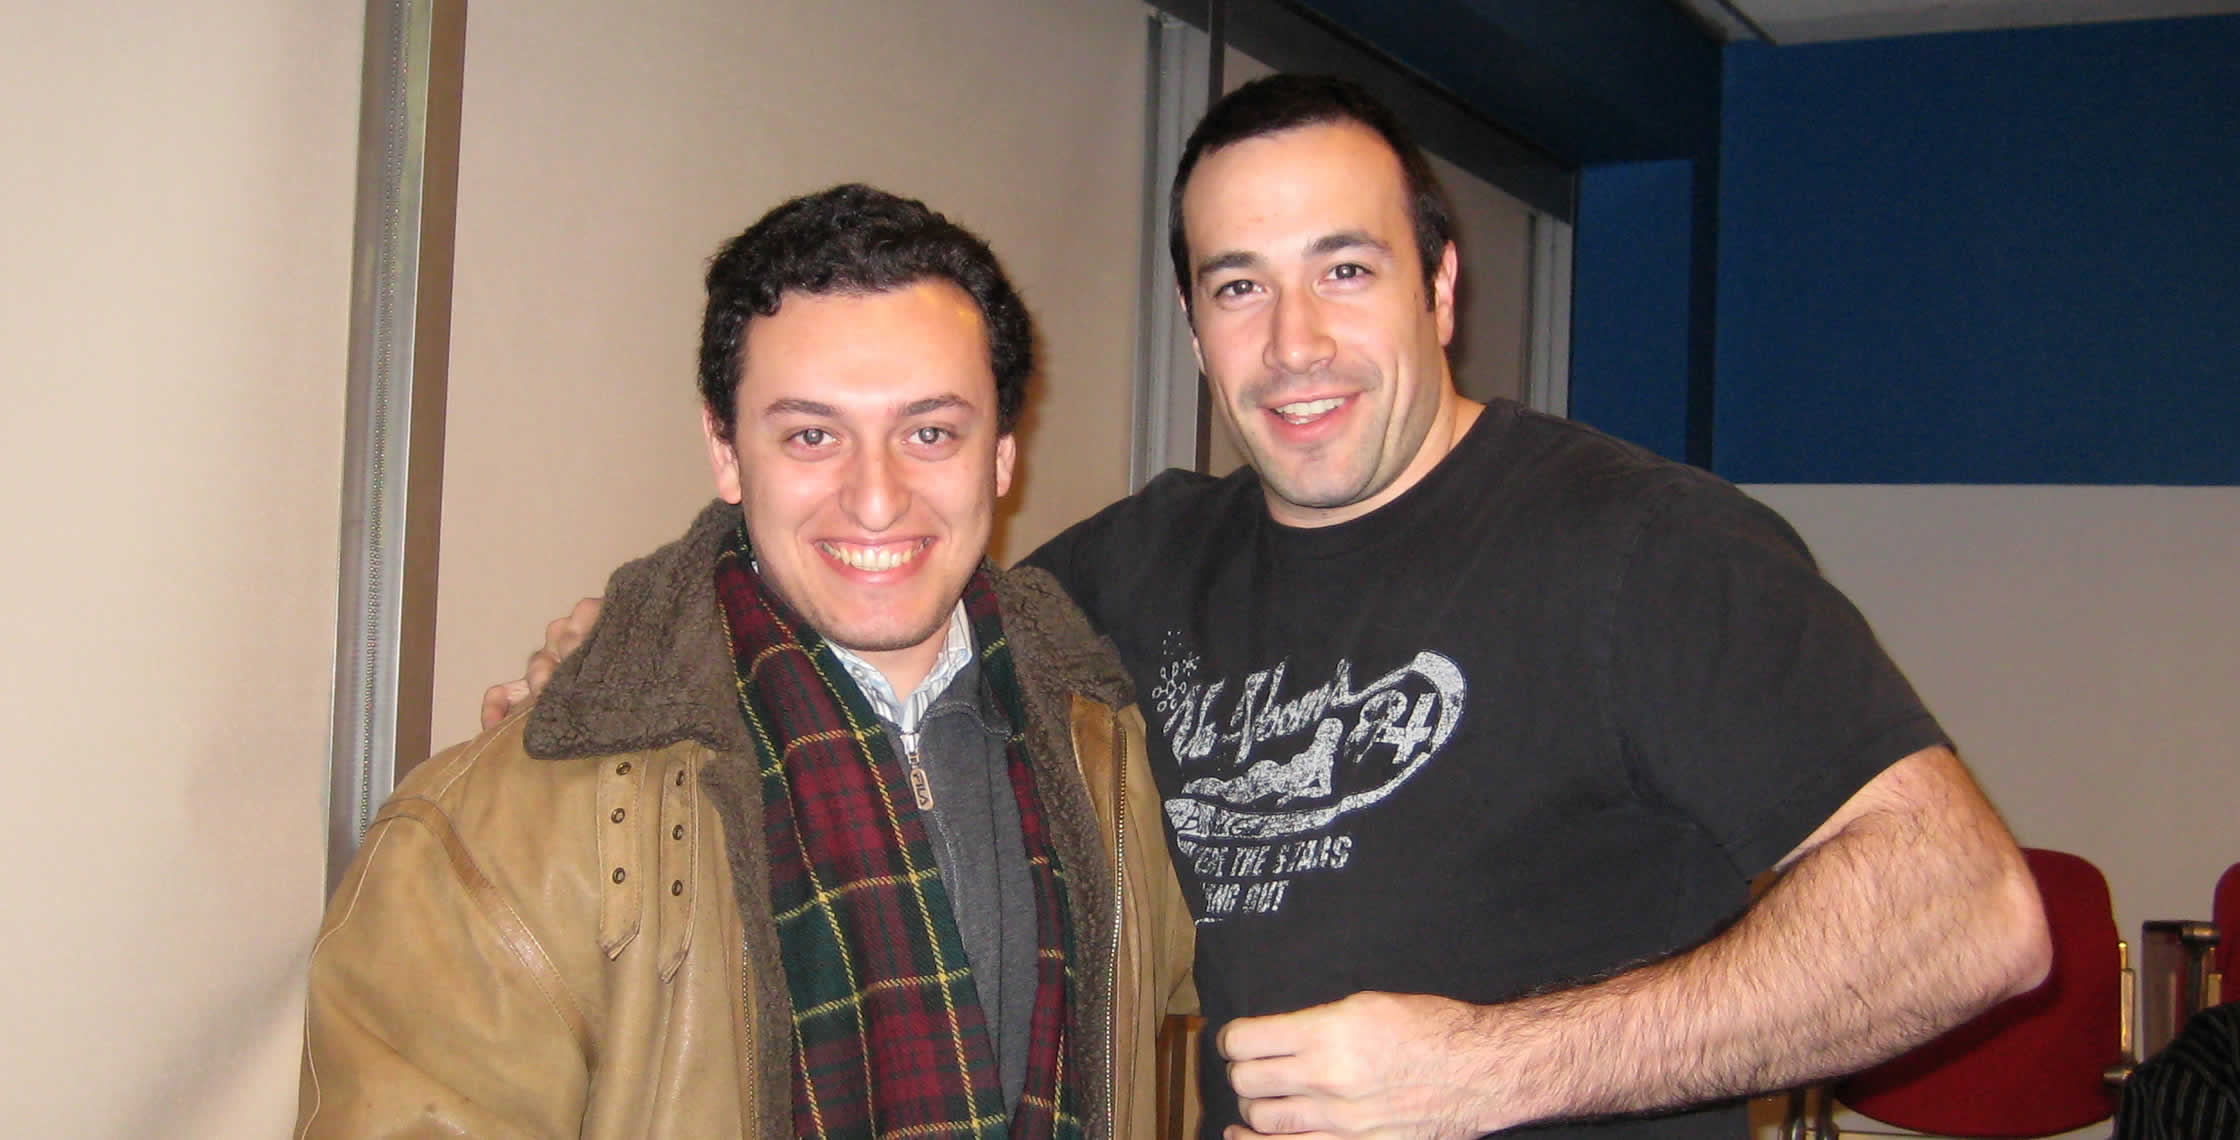 Ben Nadel at the New York ColdFusion User Group (Feb. 2008) with: Dmitriy Goltseker